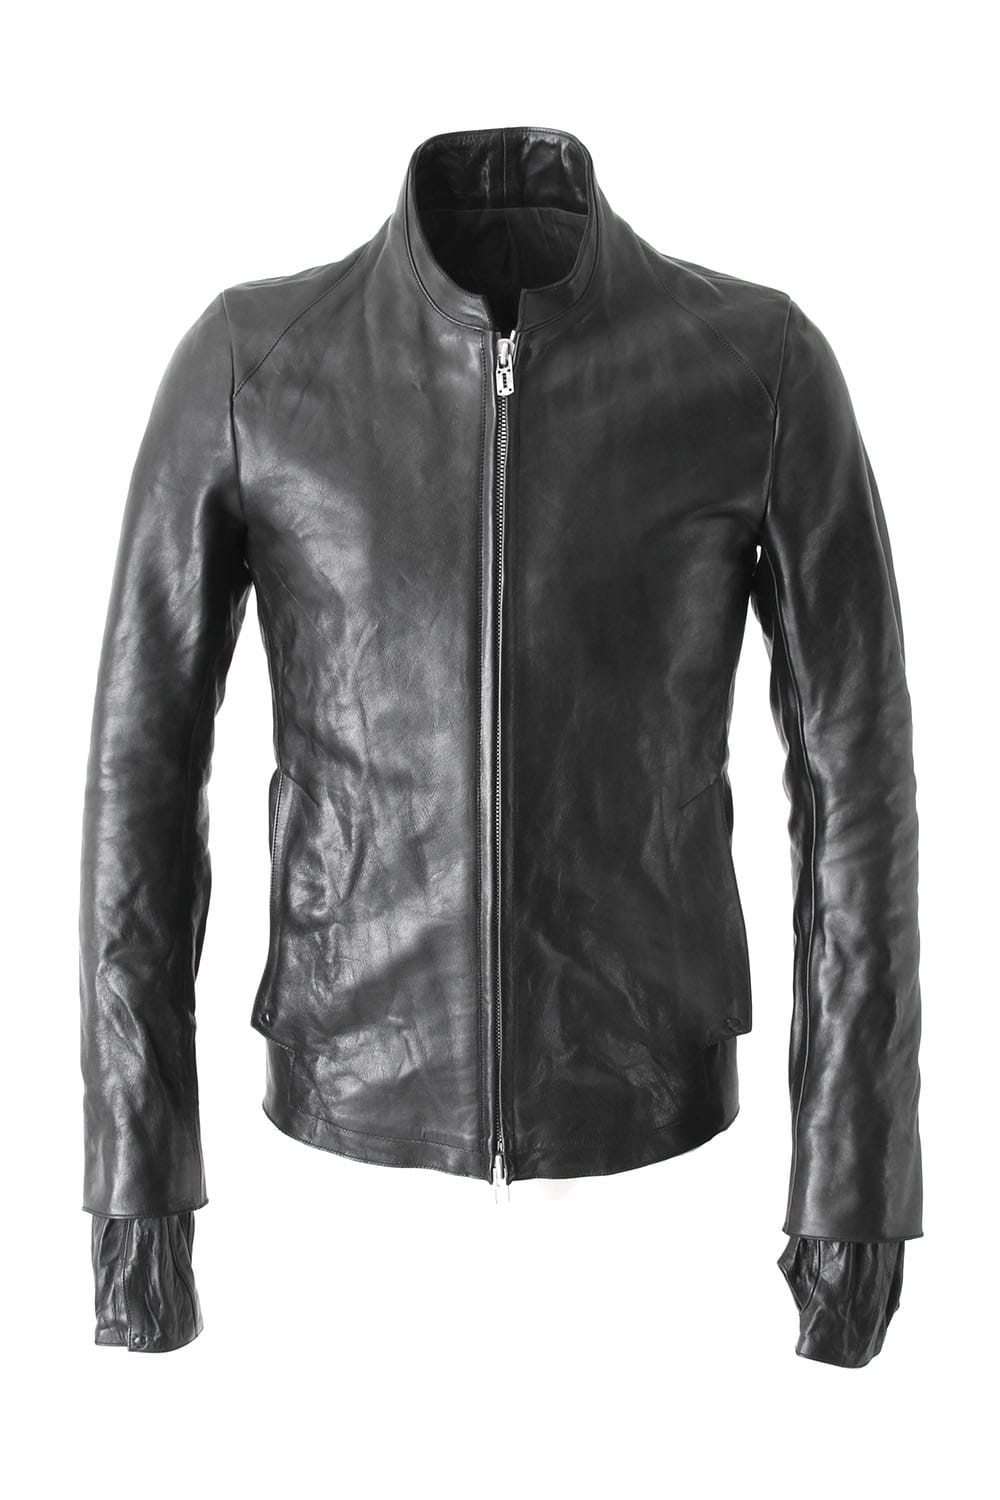 Horse Leather Jacket - Saddam Teissy D.HYGEN Online Store - FASCINATE ...